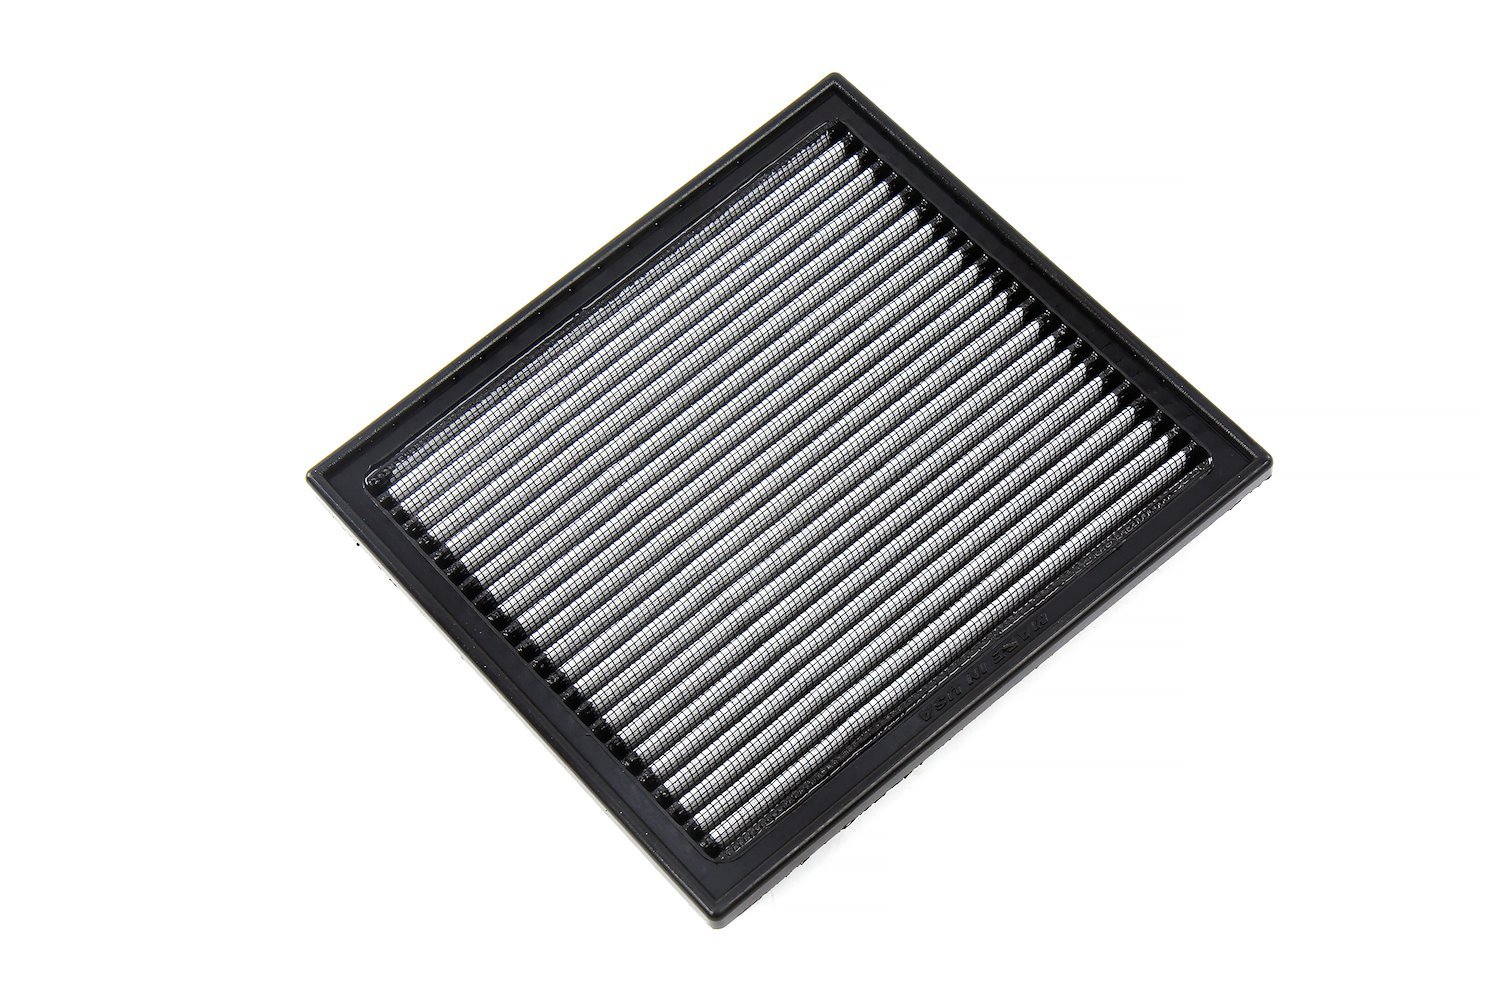 HPS-457378 Performance Drop-In Air Filter, Directly Replaces OEM Drop-In Panel Filter, Improves Performance & Fuel Economy